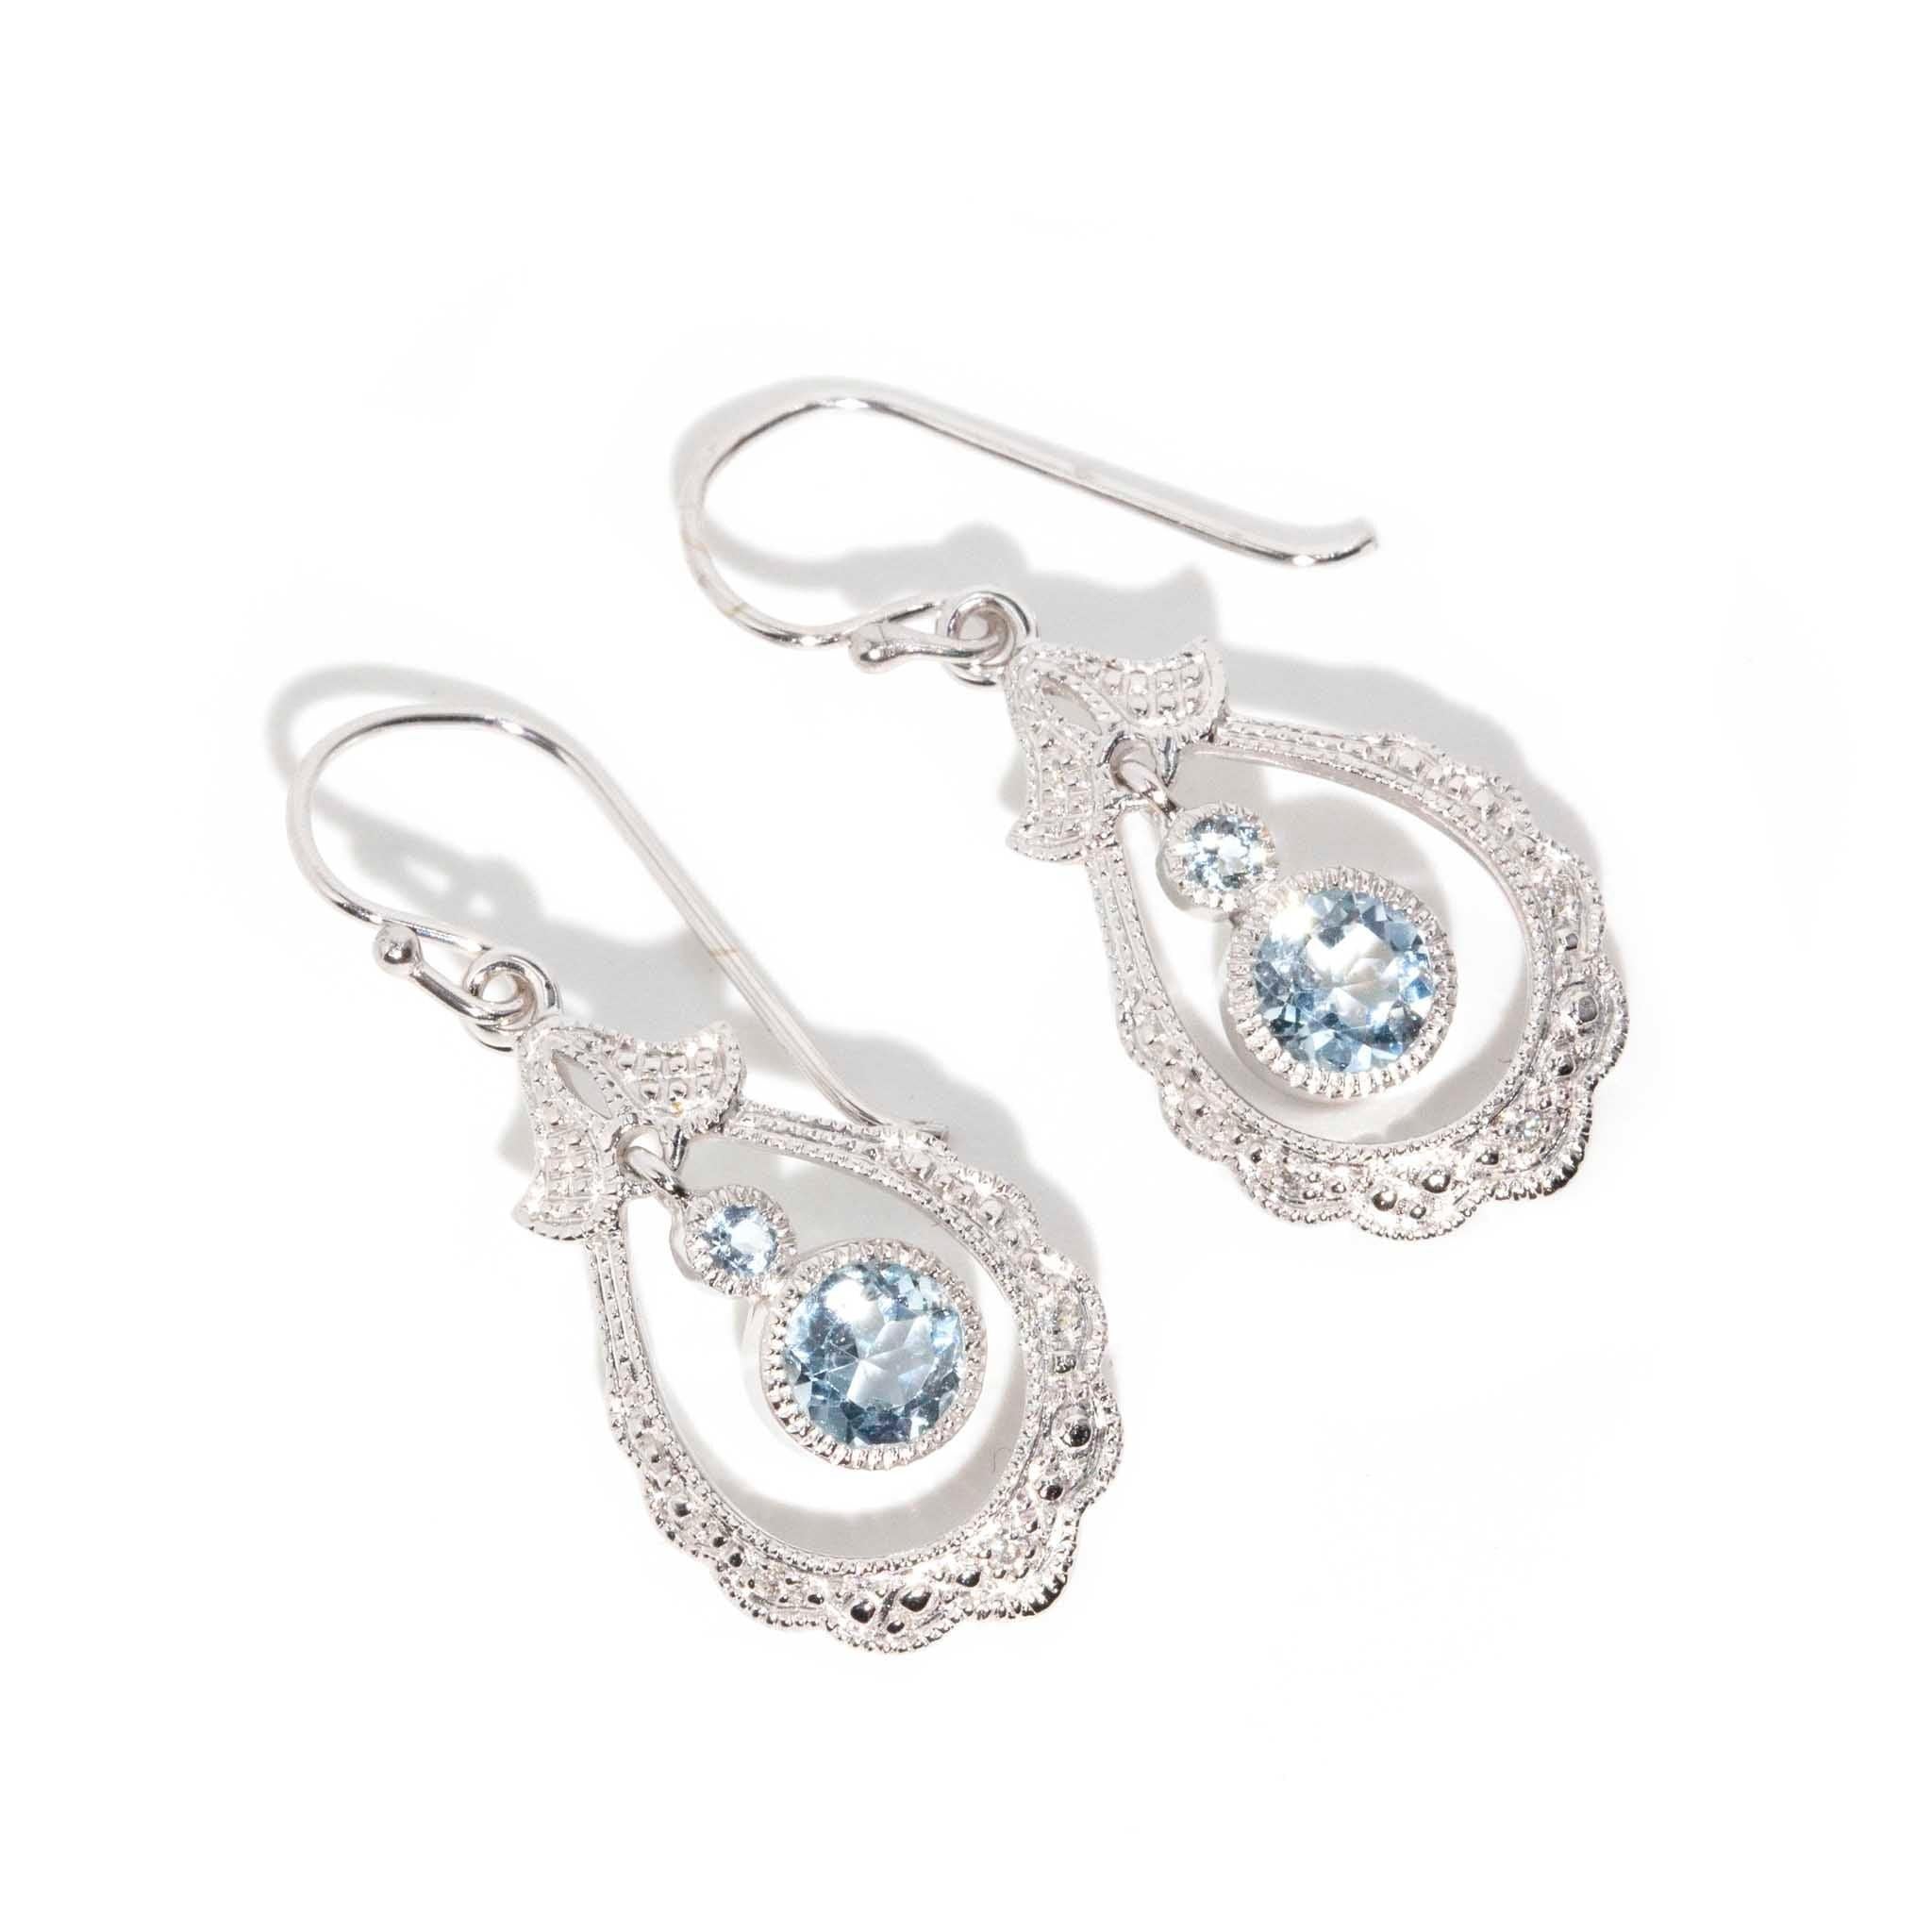 As sweet and delicate as her name may suggest, The Birdie Earrings are a flight of whimsy. Ornately crafted, she is as though lace was woven using white gold thread and finished with the shimmer of blue aquamarines. The stage is set for her